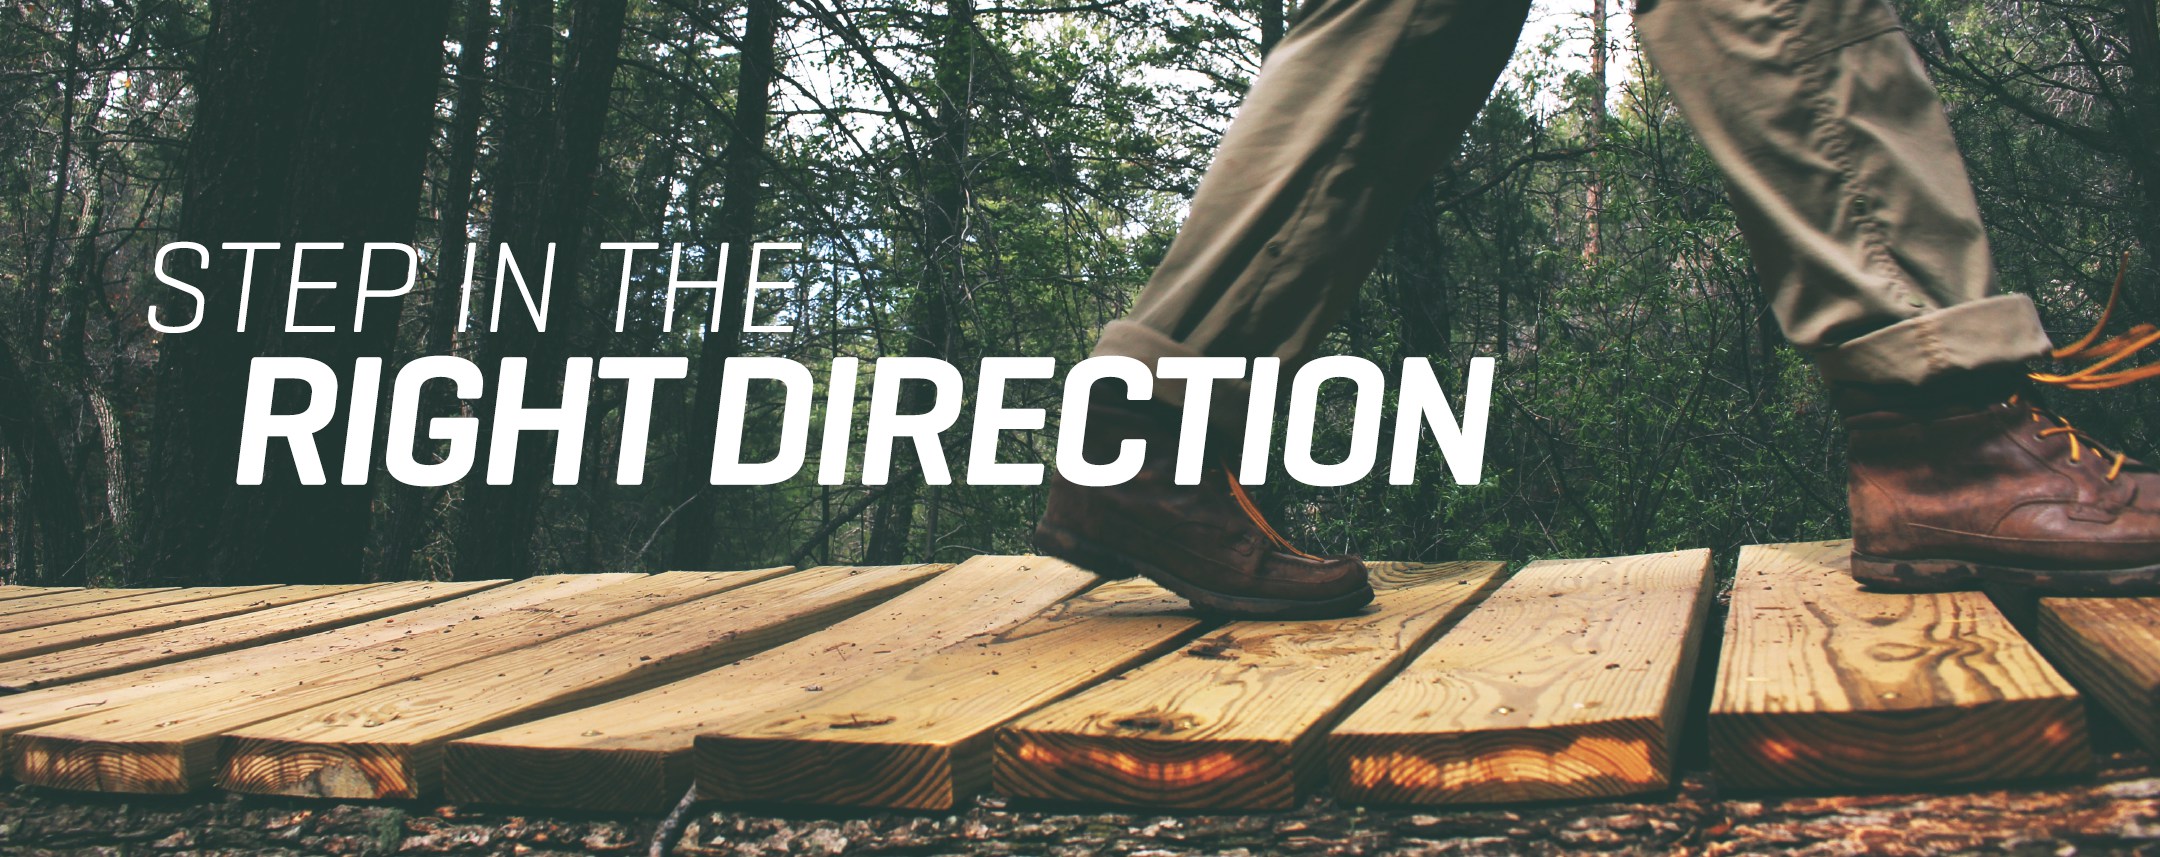 right-direction-FEATURED.jpg